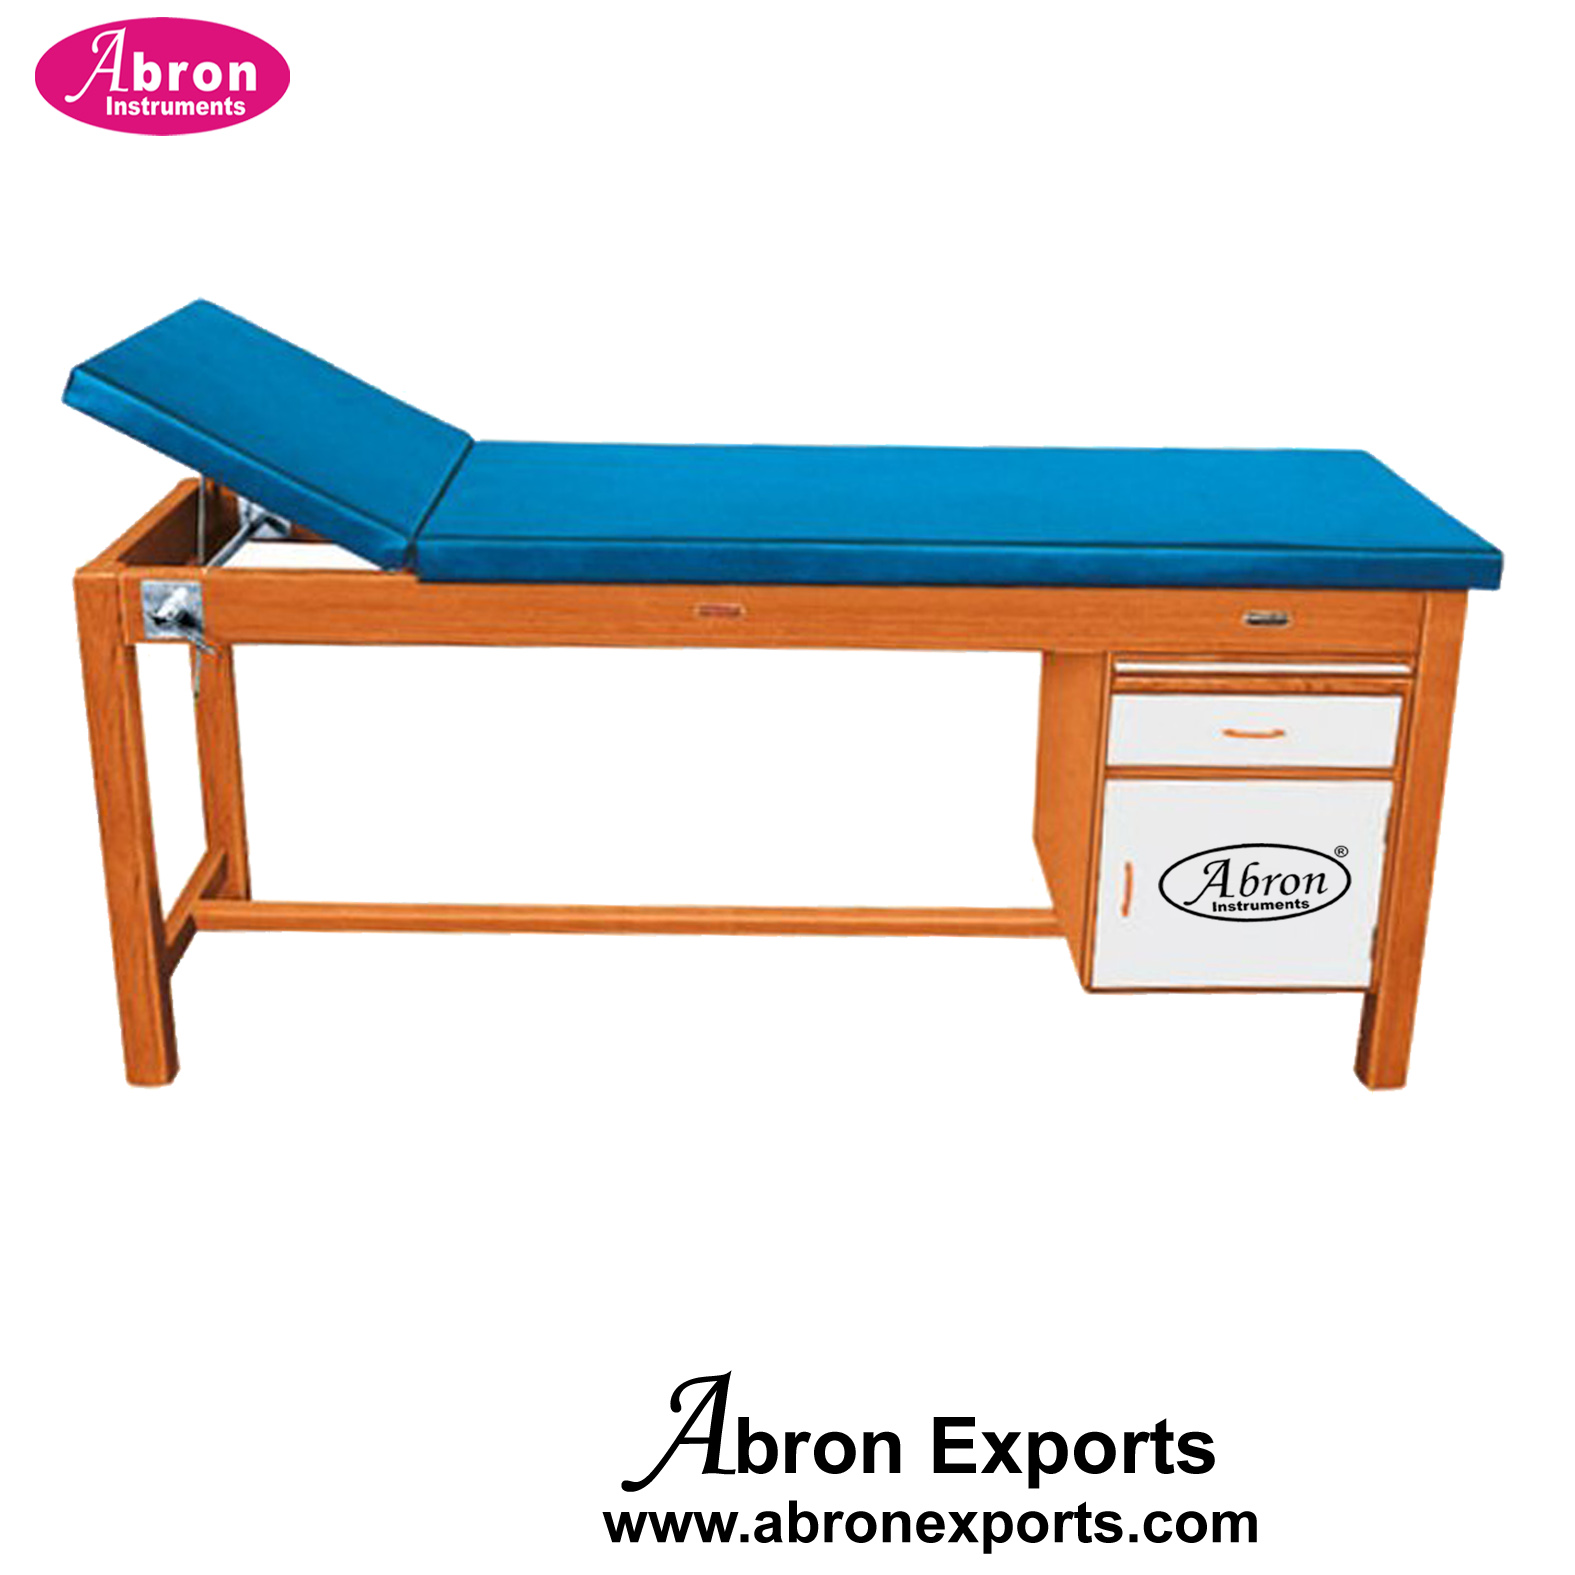 Examination Table Couch Wooden With Side Draws With Matress Treatment Hospital Nursing Home Abron